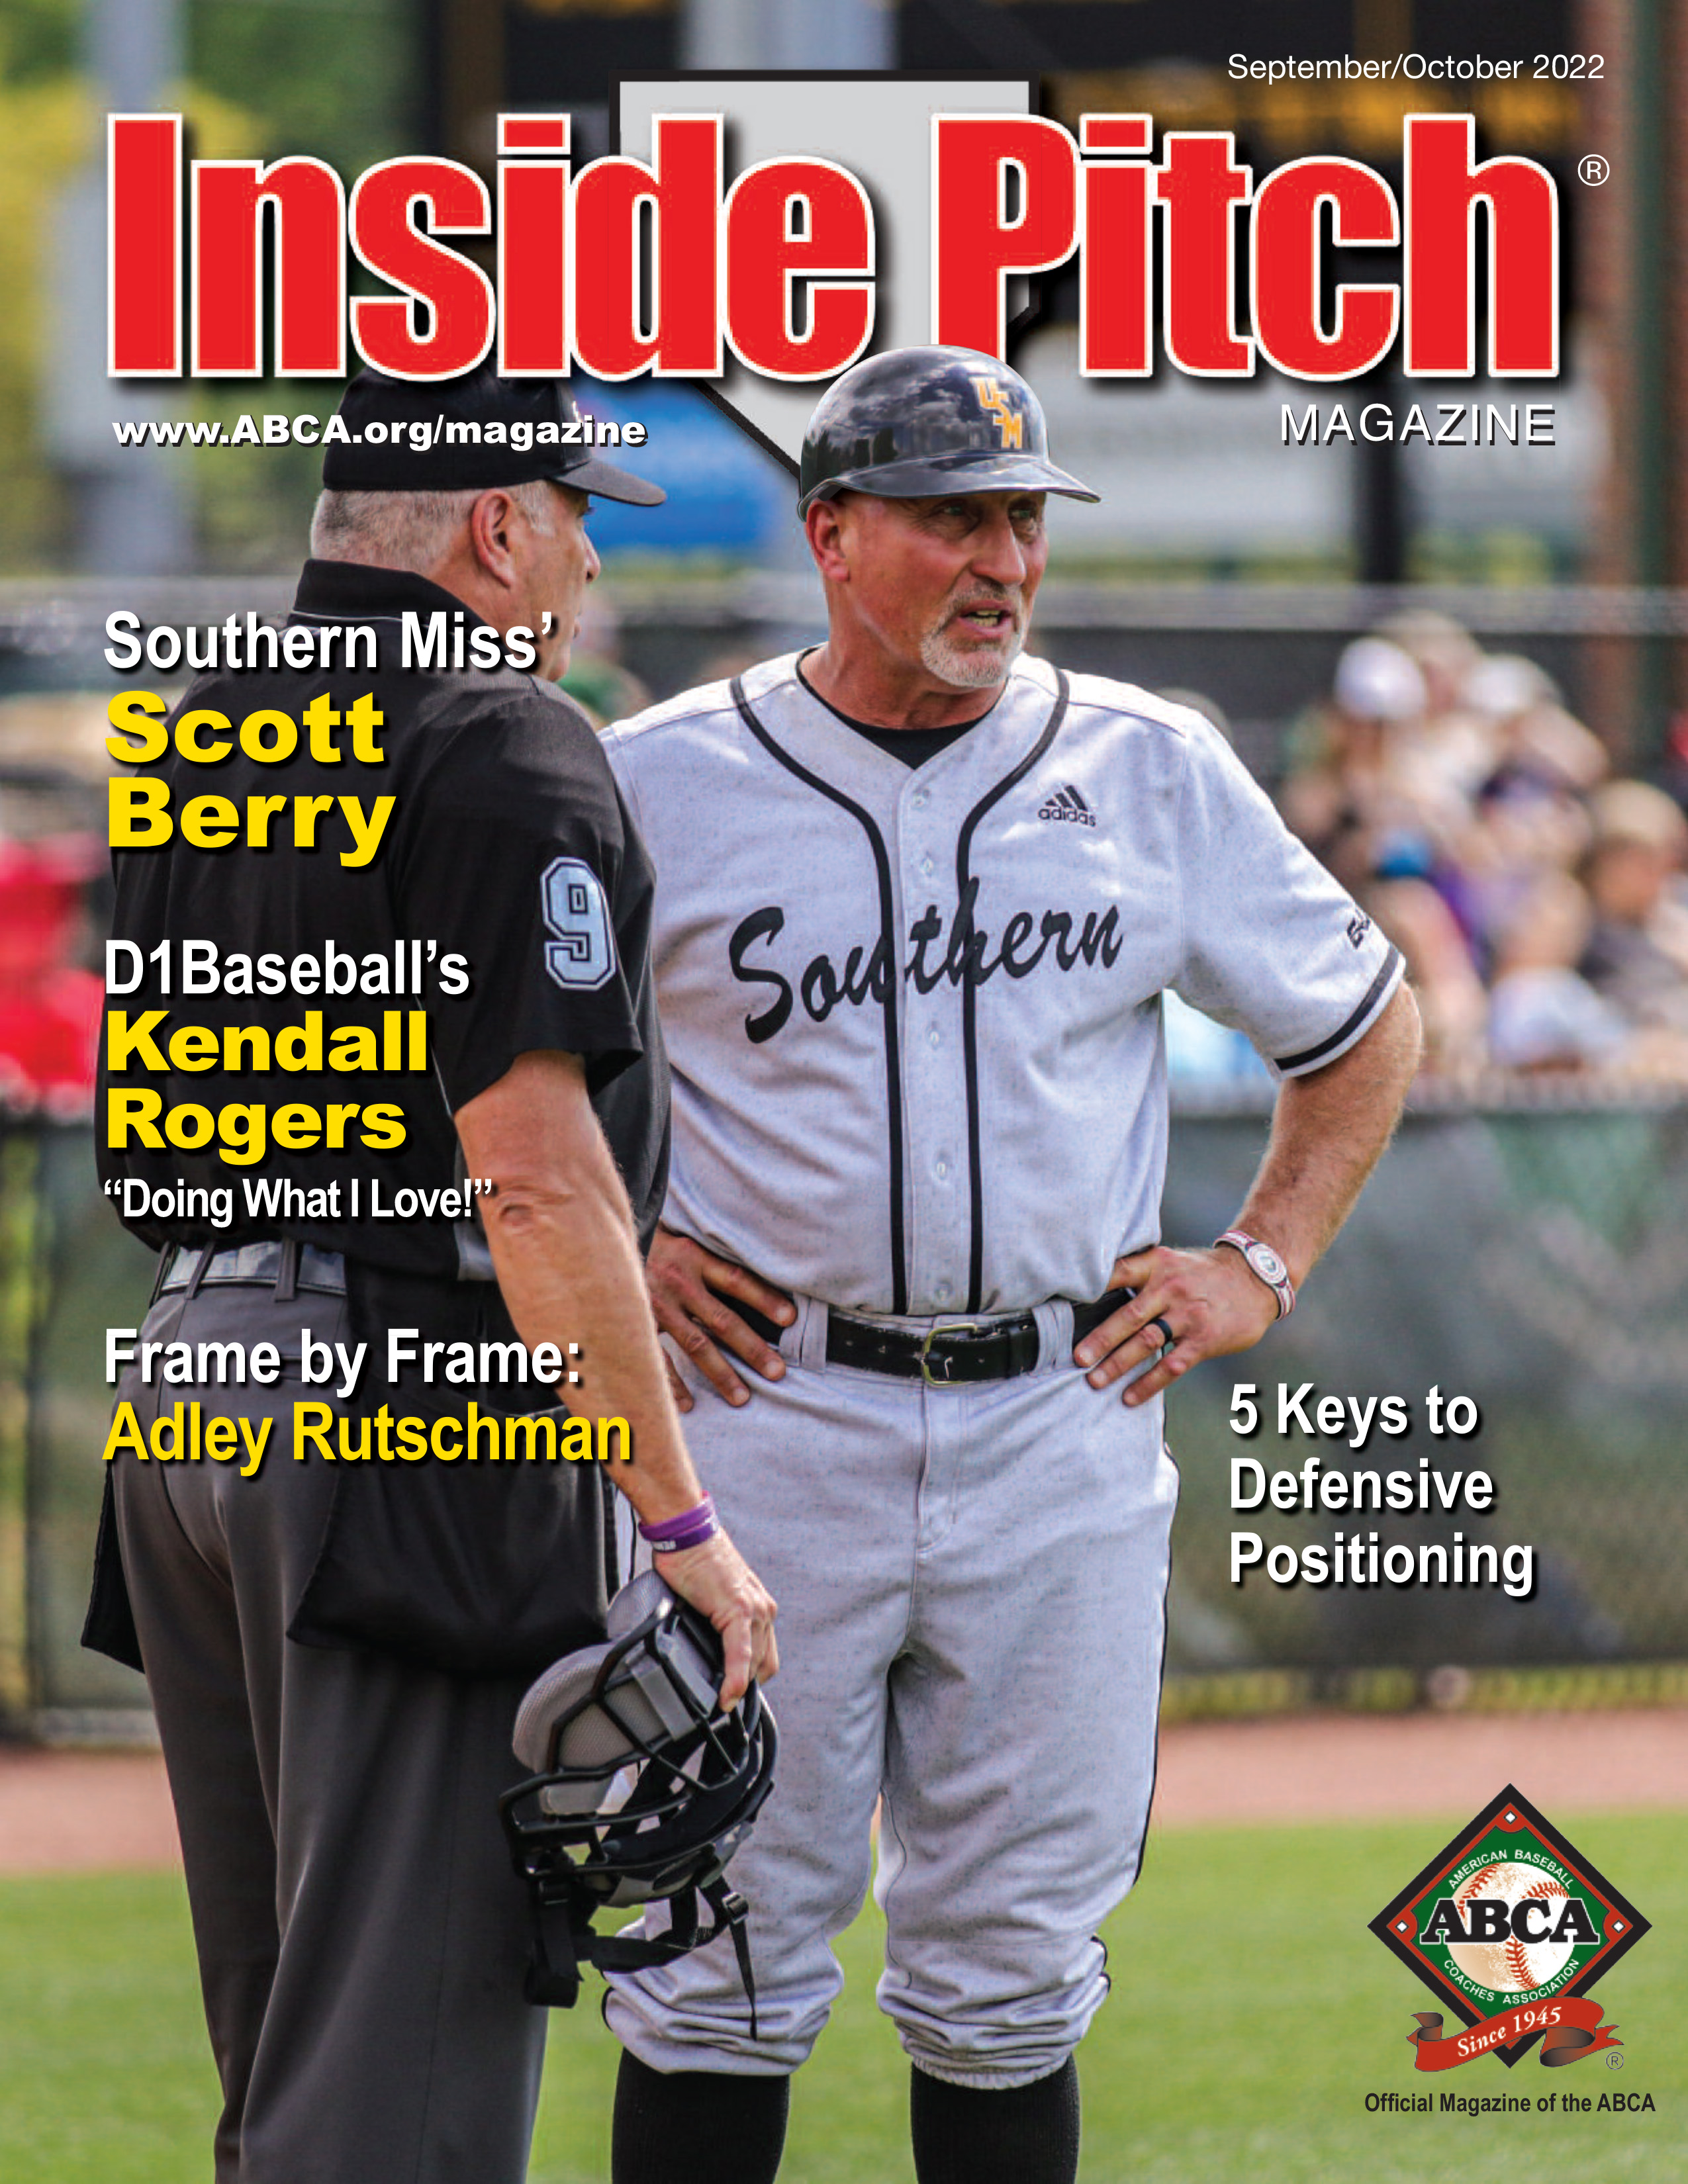 Inside Pitch Magazine Cover with Scott Berry